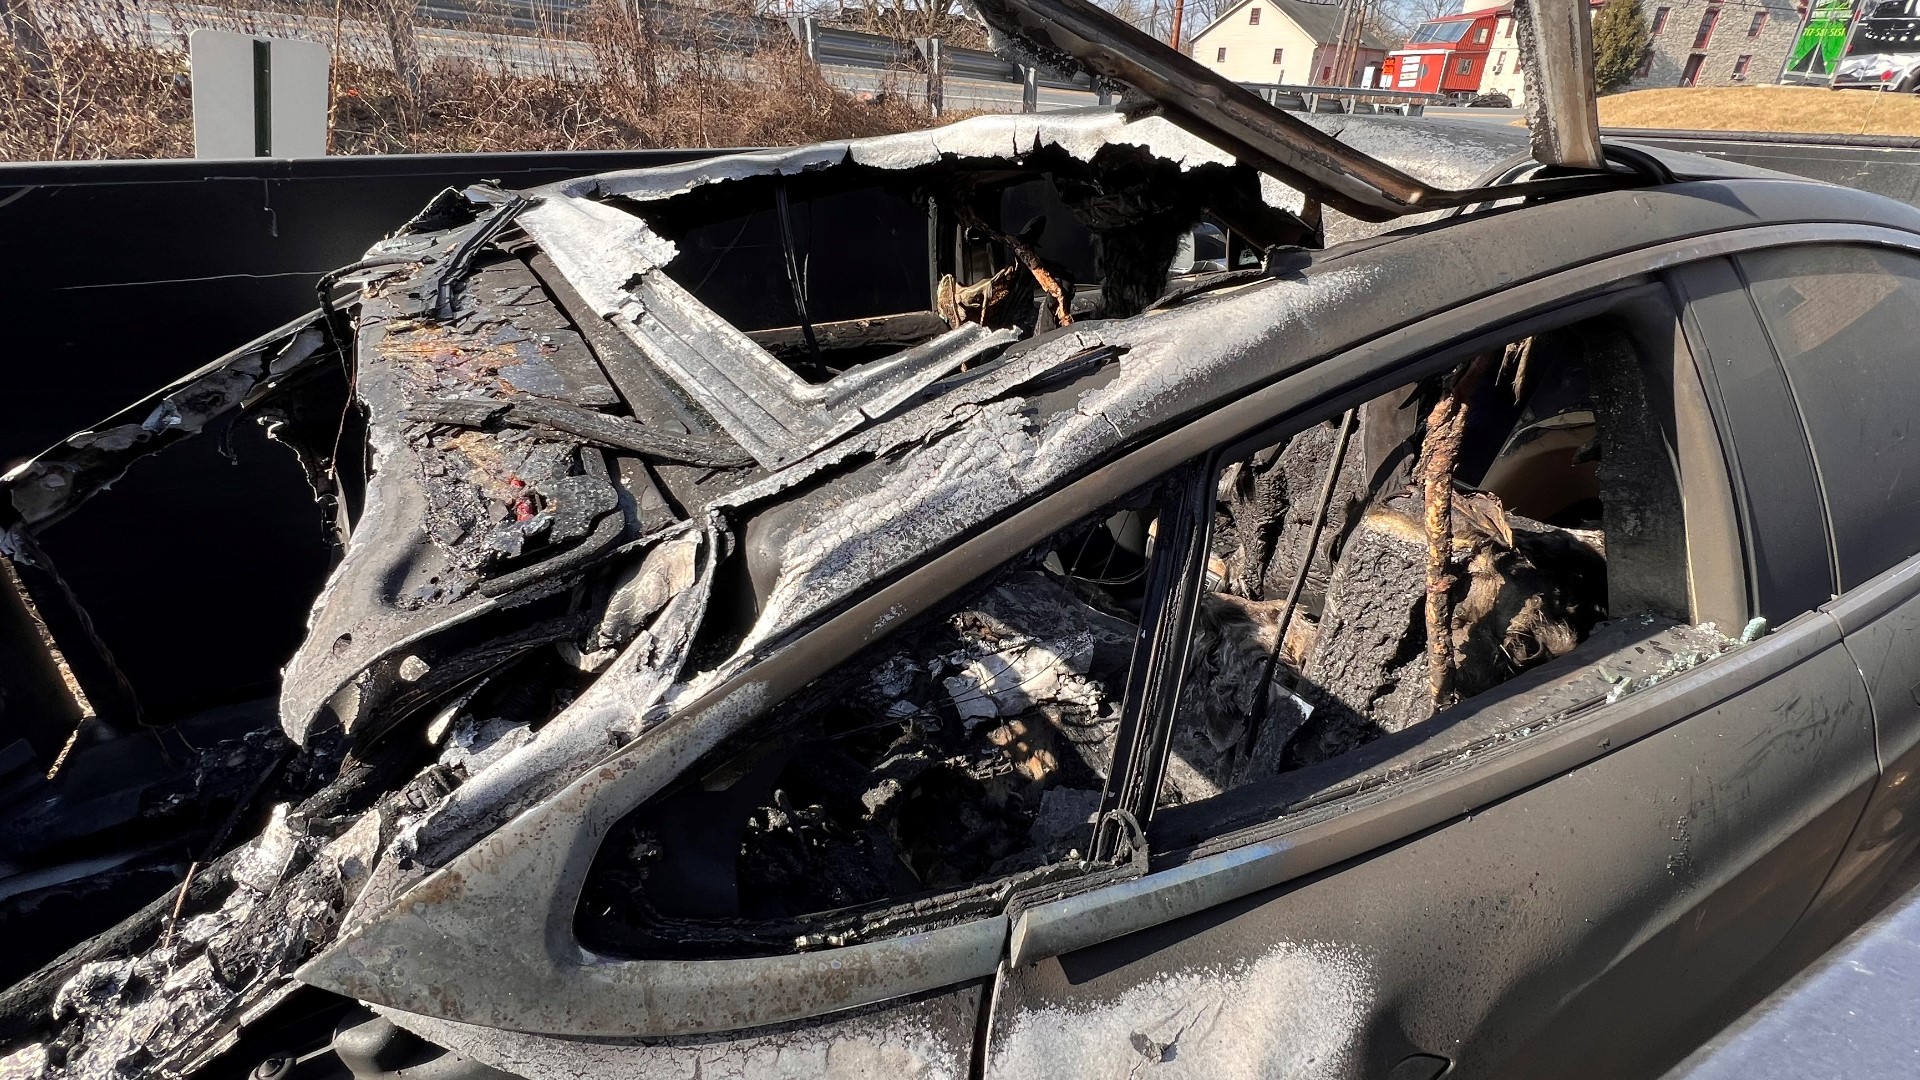 A recent vehicle fire in Lancaster County is showcasing the obstacles these industries have to deal with.